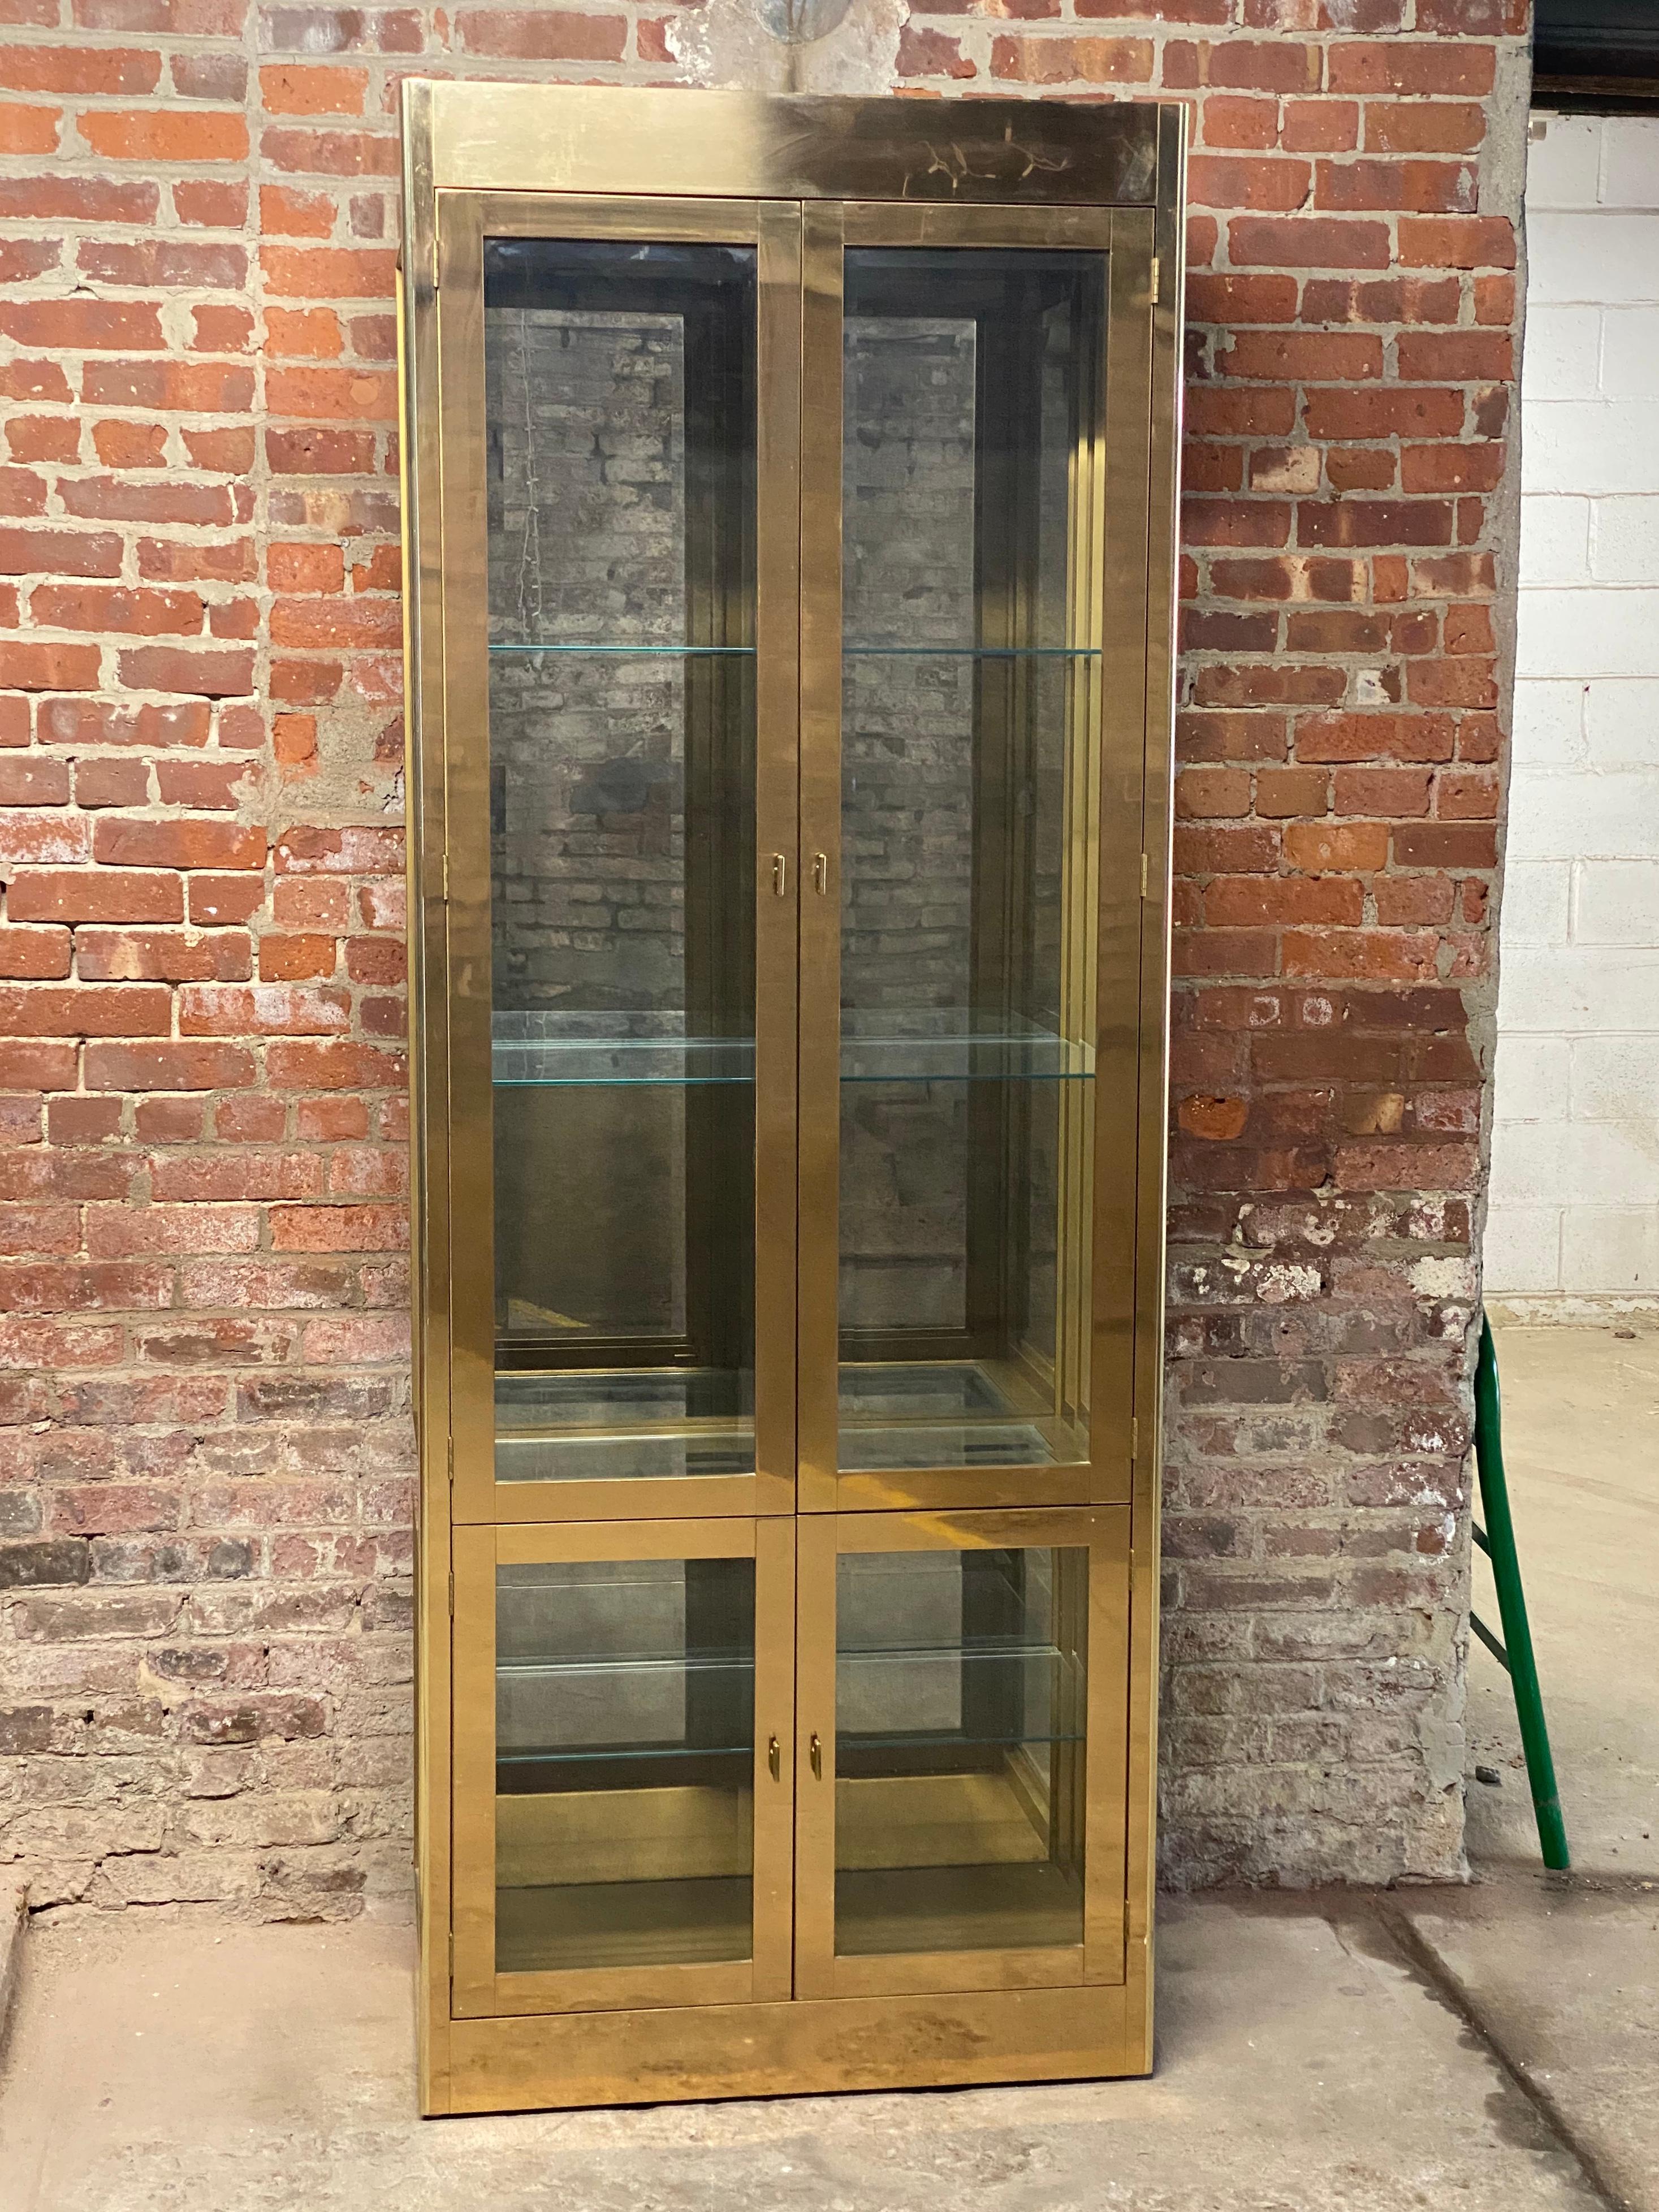 Brass and glass Mastercraft display cabinet designed by Bernhard Rohne. Brass clad cabinet, mirrored back, beveled glass panels and adjustable height glass shelves. The ultimate luxury display cabinet for your valuables and collectibles. Signed on